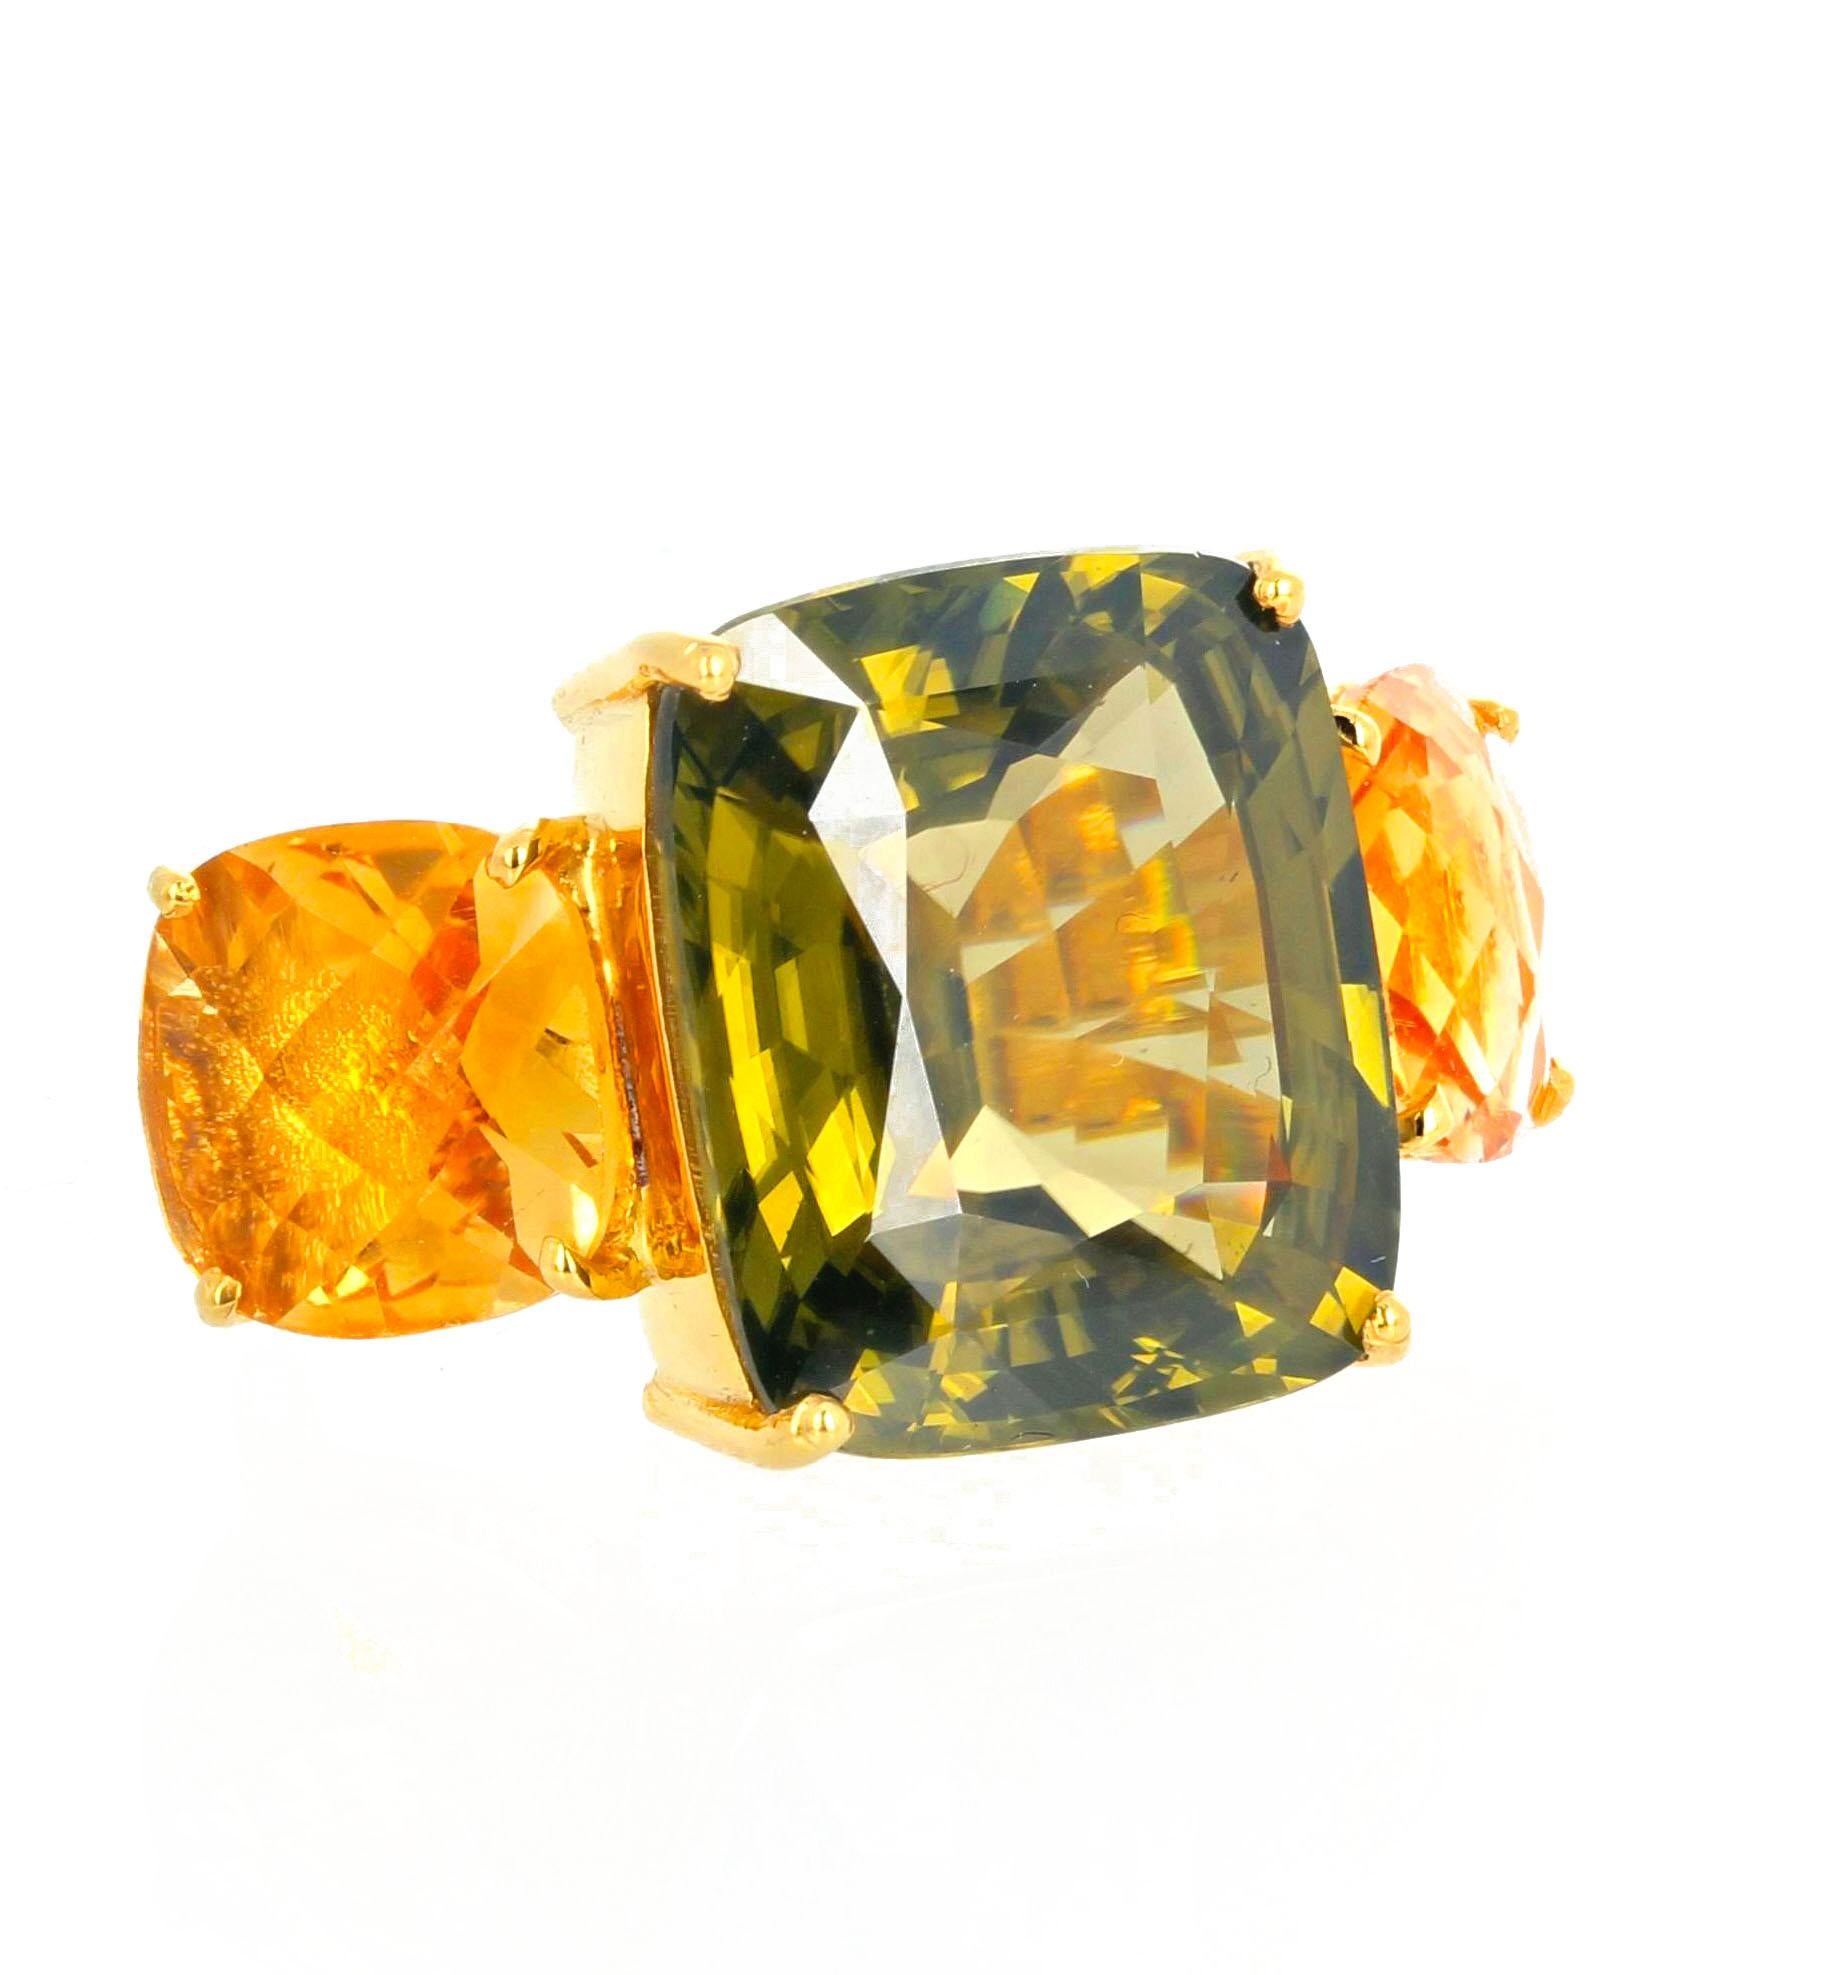 Women's or Men's AJD VERY RARE Intensely Brilliant Fiery Green 22.68 Ct ZIRCON & Citrine Ring For Sale